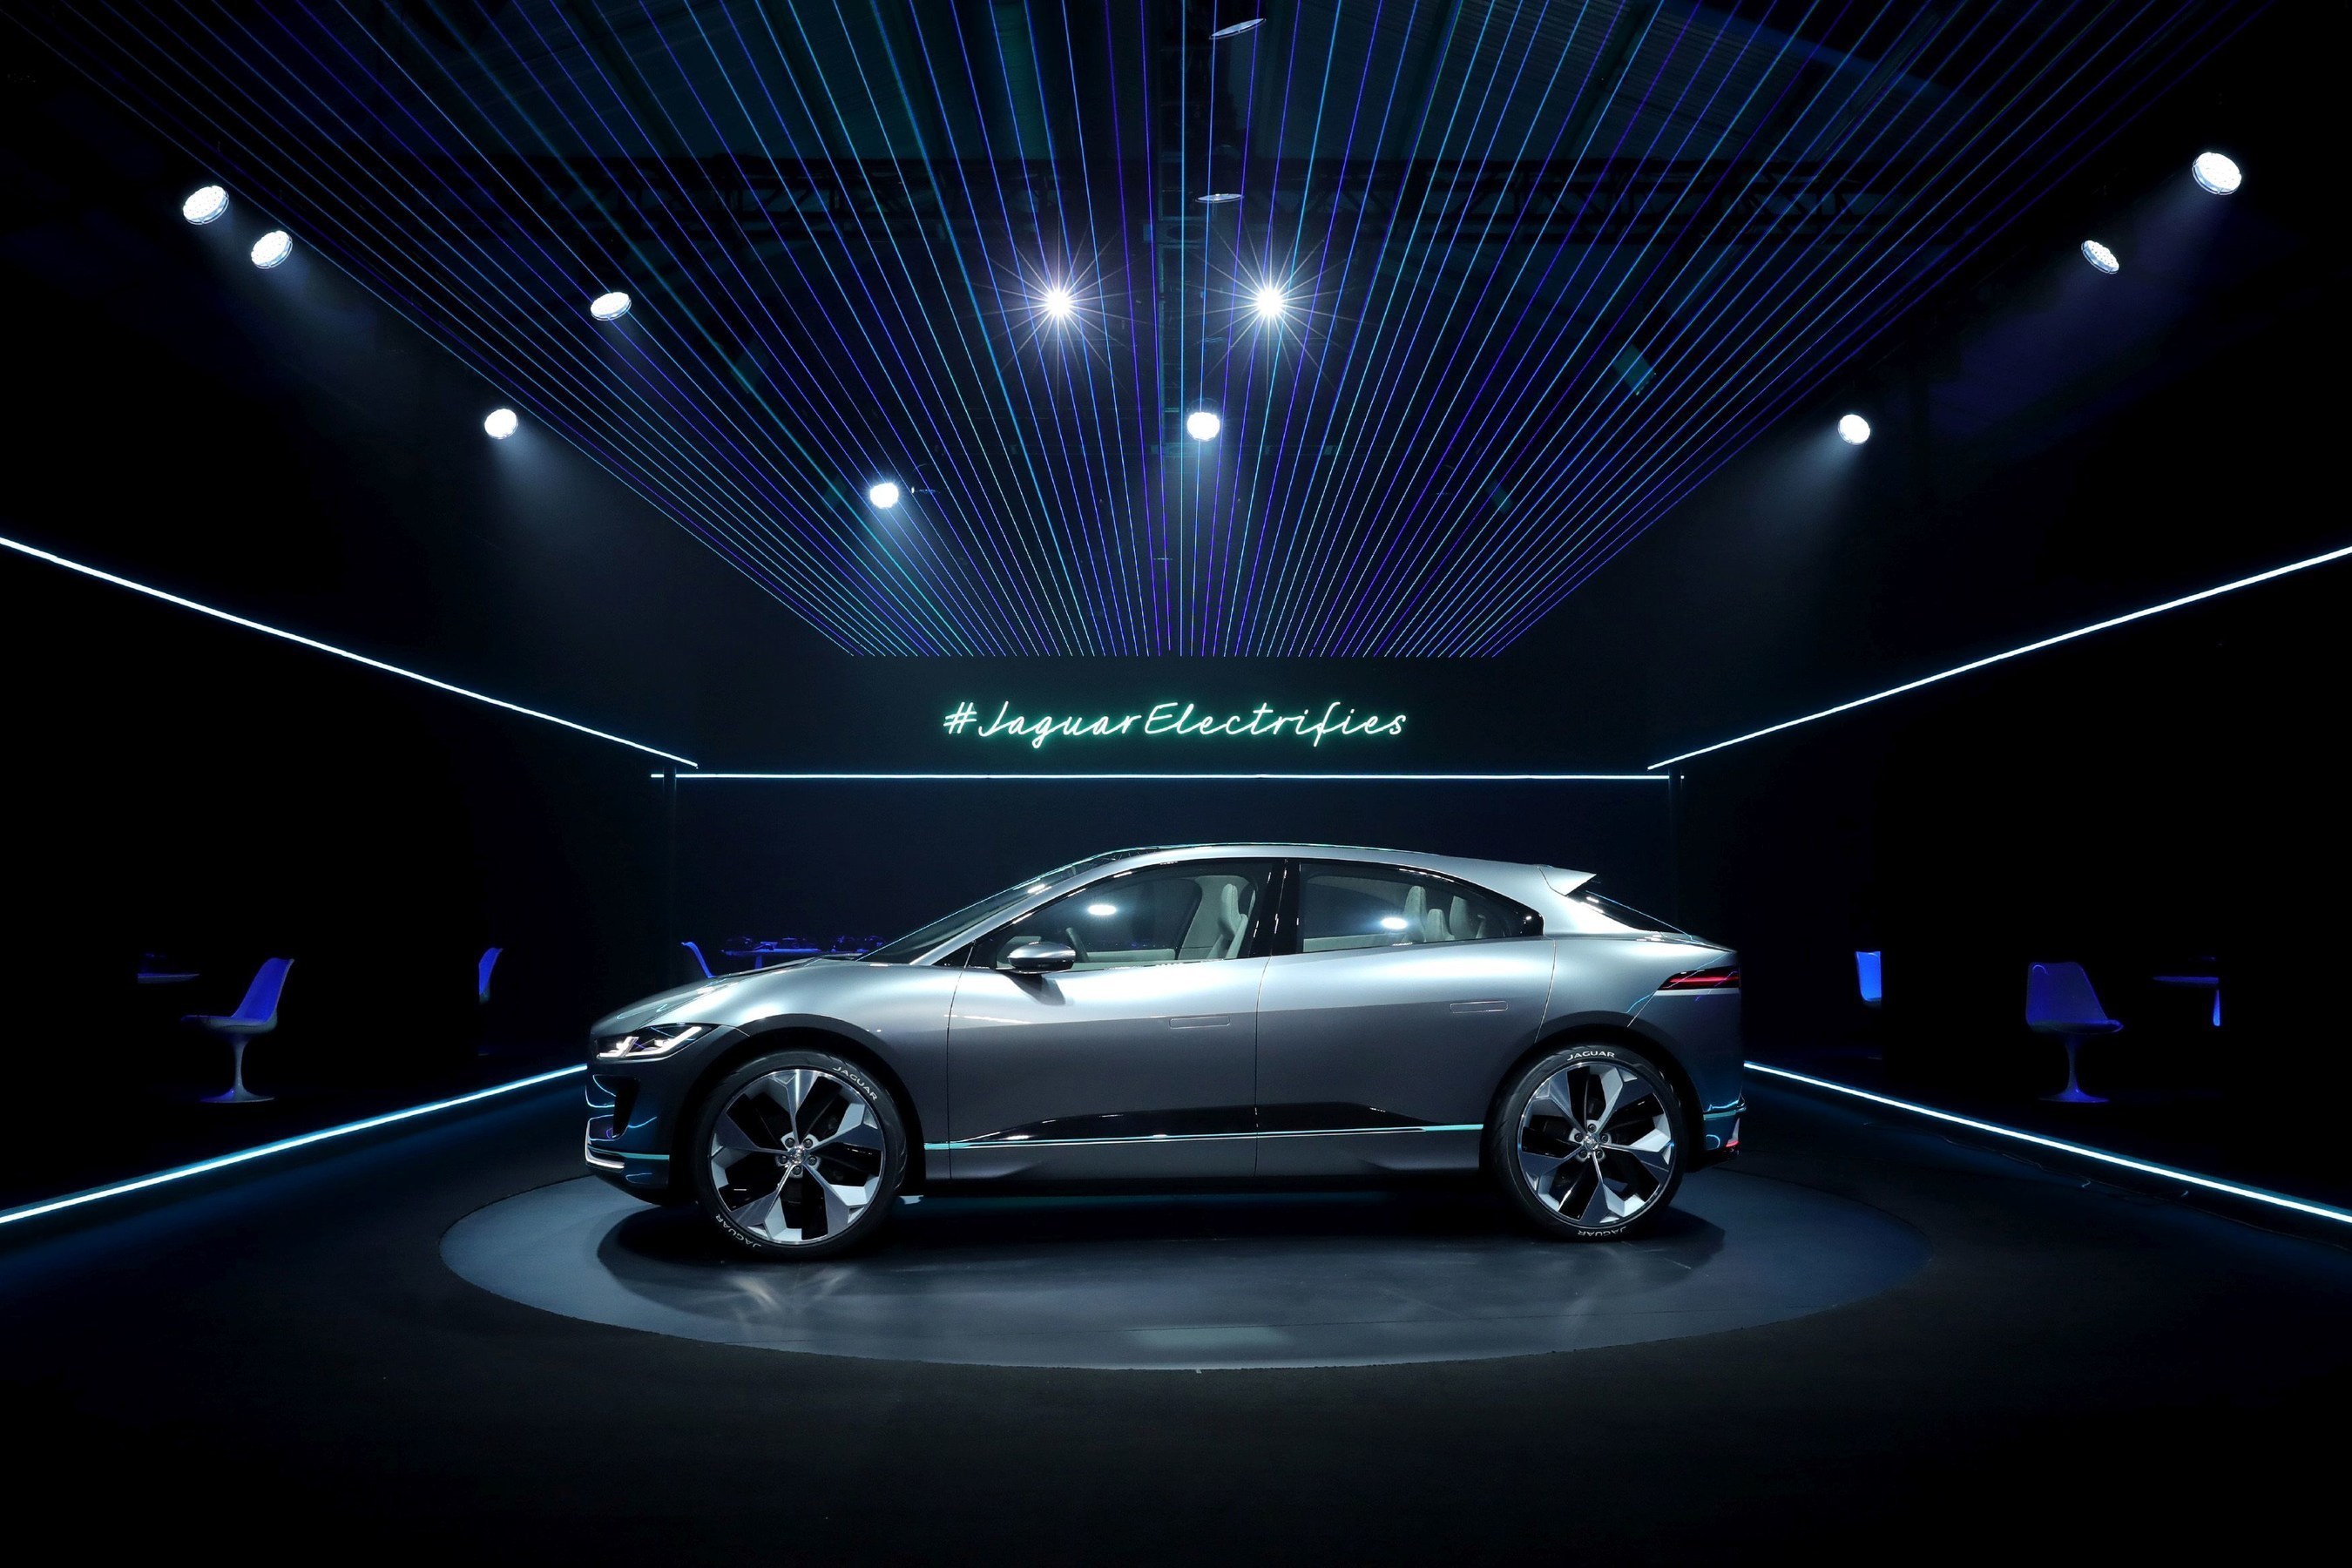 Jaguar I-PACE Concept, Jaguar's first fully electric car is unveiled in LA at pioneering virtual reality reveal (PRNewsFoto/Jaguar Land Rover)